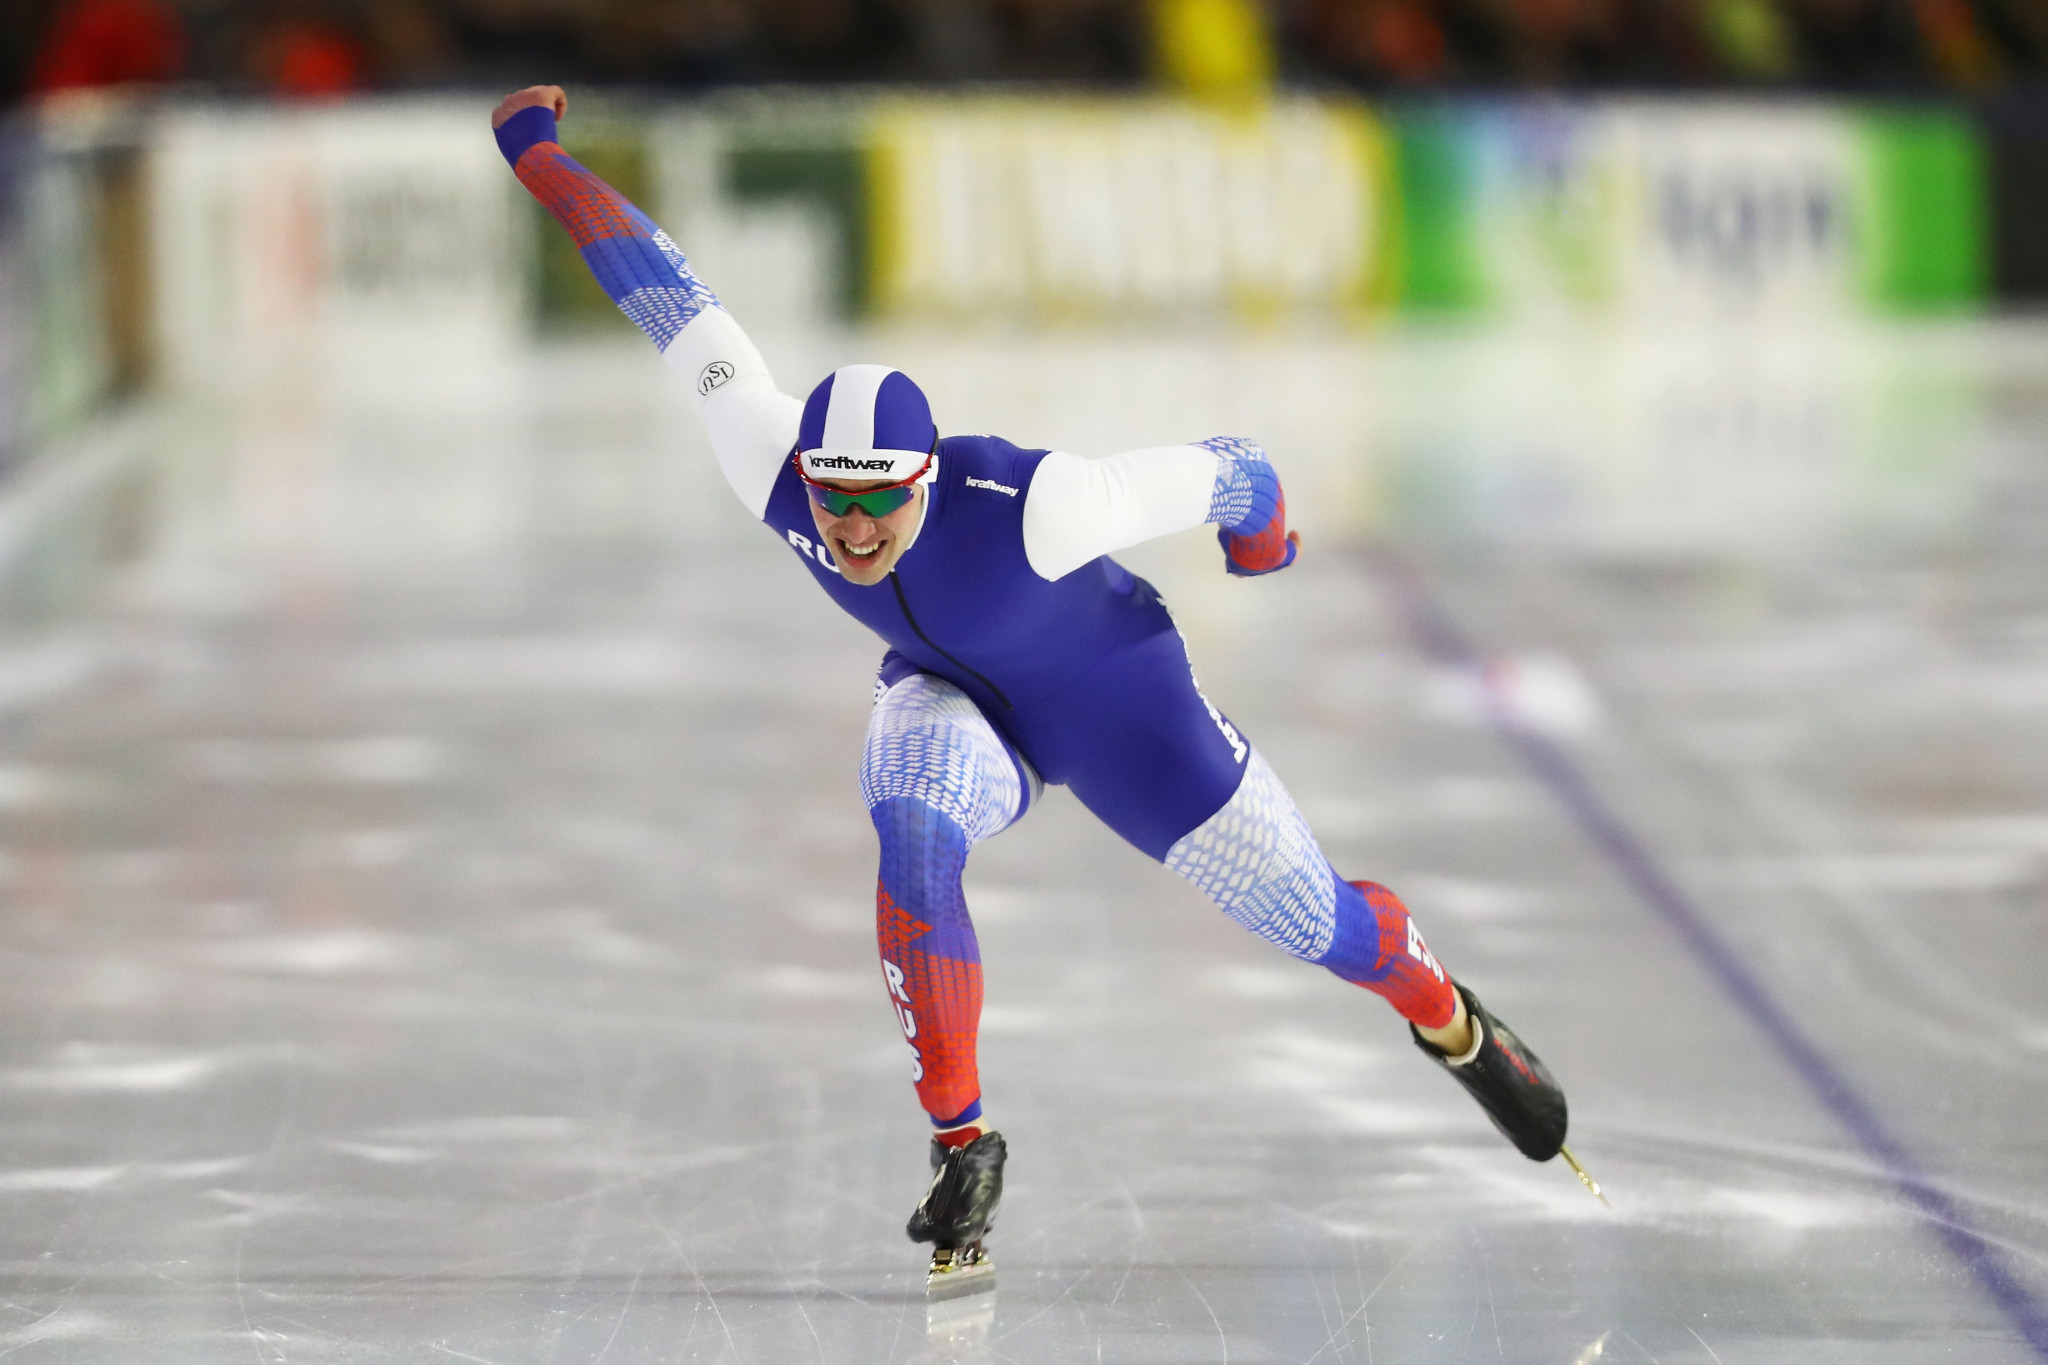 Russia's Viktor Mushtakov was among the winners on day one of the ISU Speed Skating World Cup in Nur-Sultan ©Getty Images